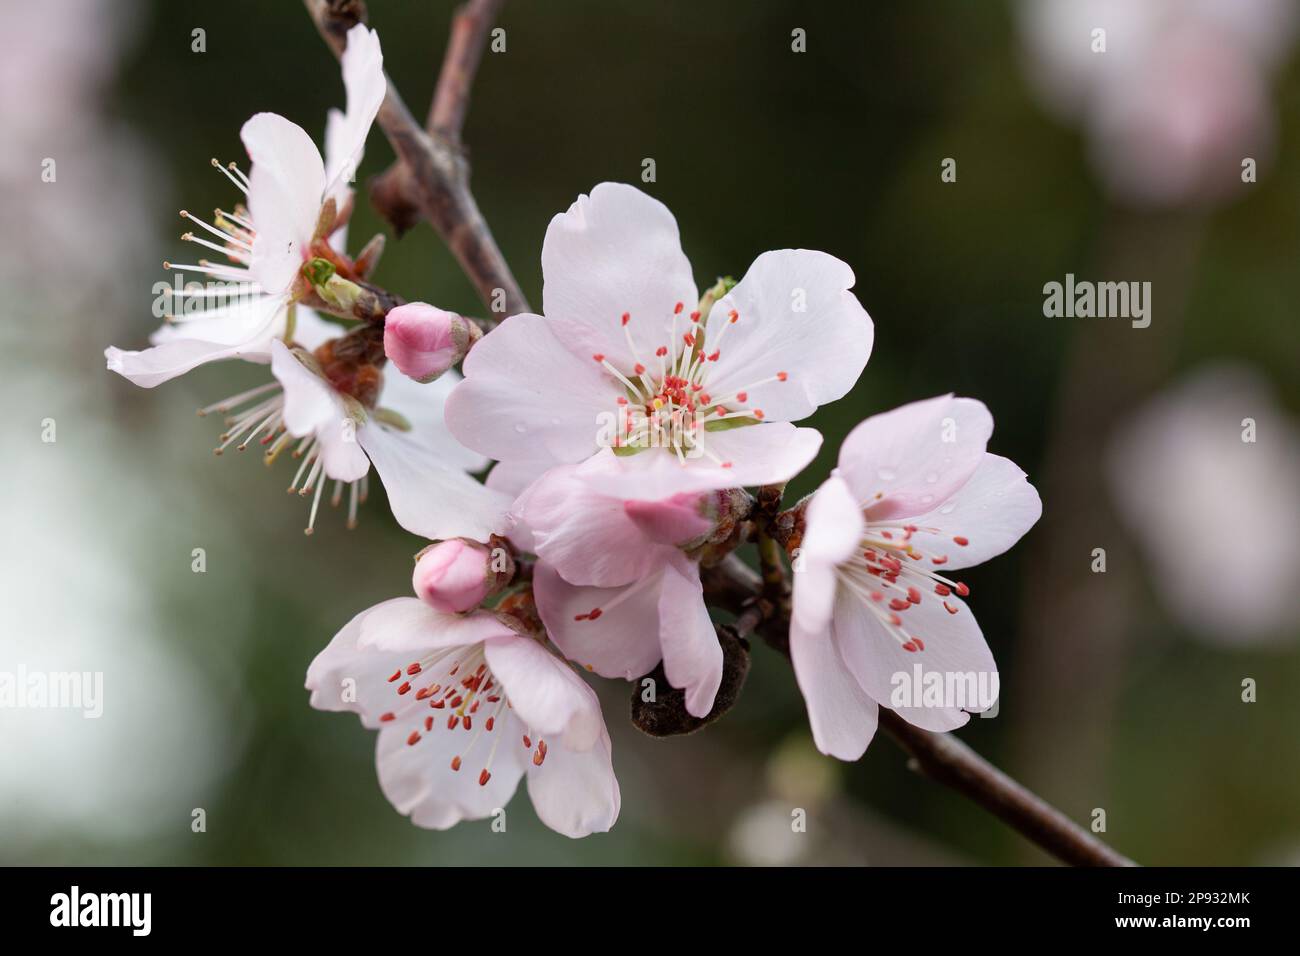 UK weather, London, 10 March 2023: Fifteen minutes after a hail storm, sun shines on almond blossom in a garden in Clapha, south London. Anna Watson/Alamy Live News Stock Photo